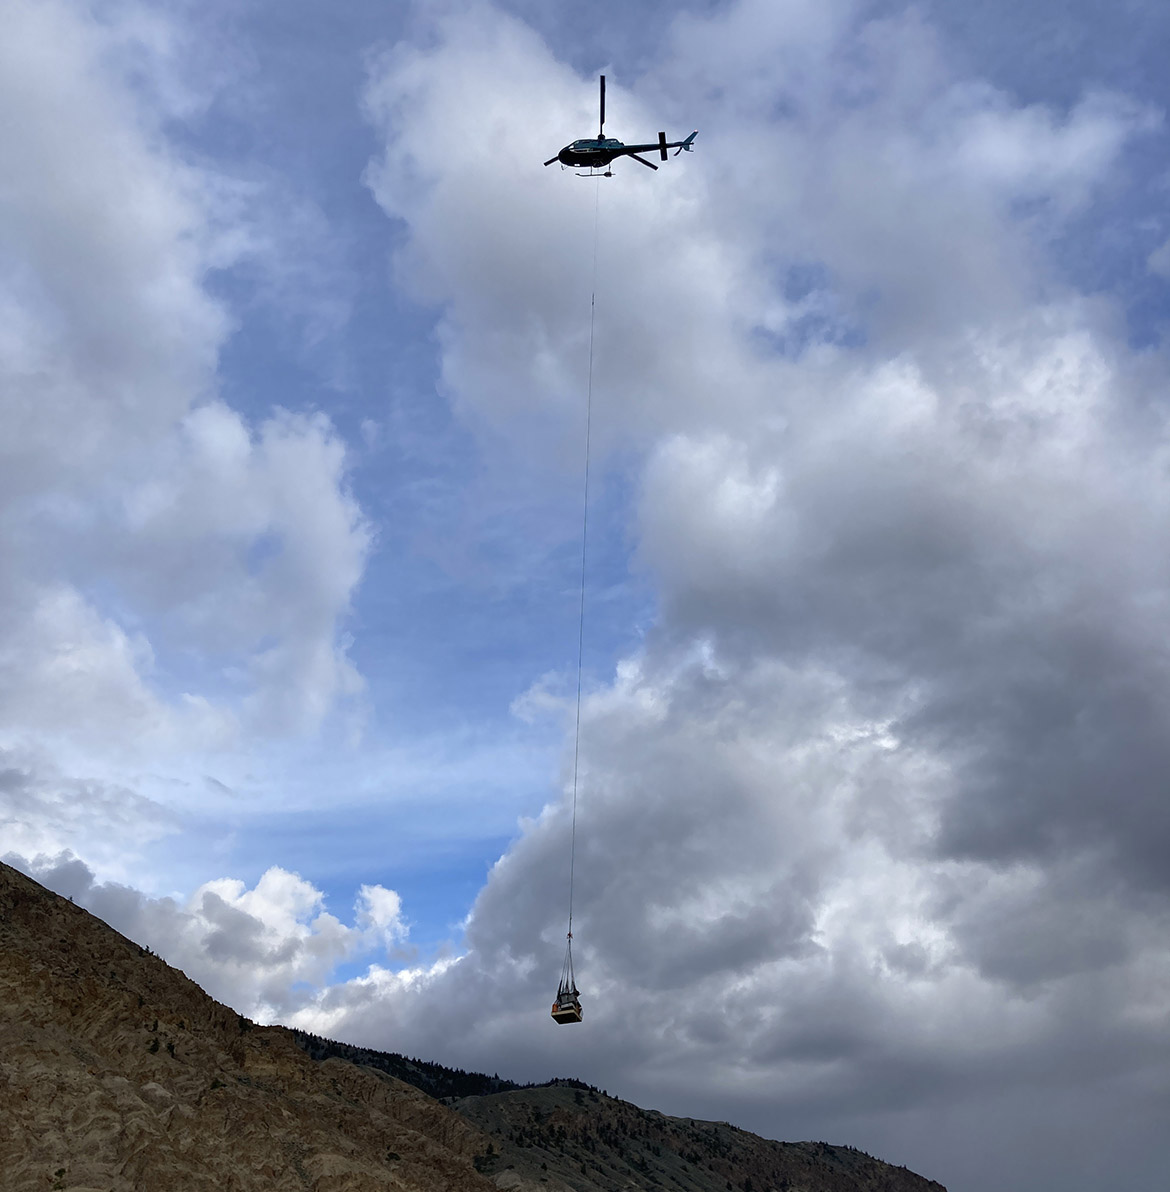 A helicopter delivers cameras, sensors and cables for installation along the west face of the cliff.